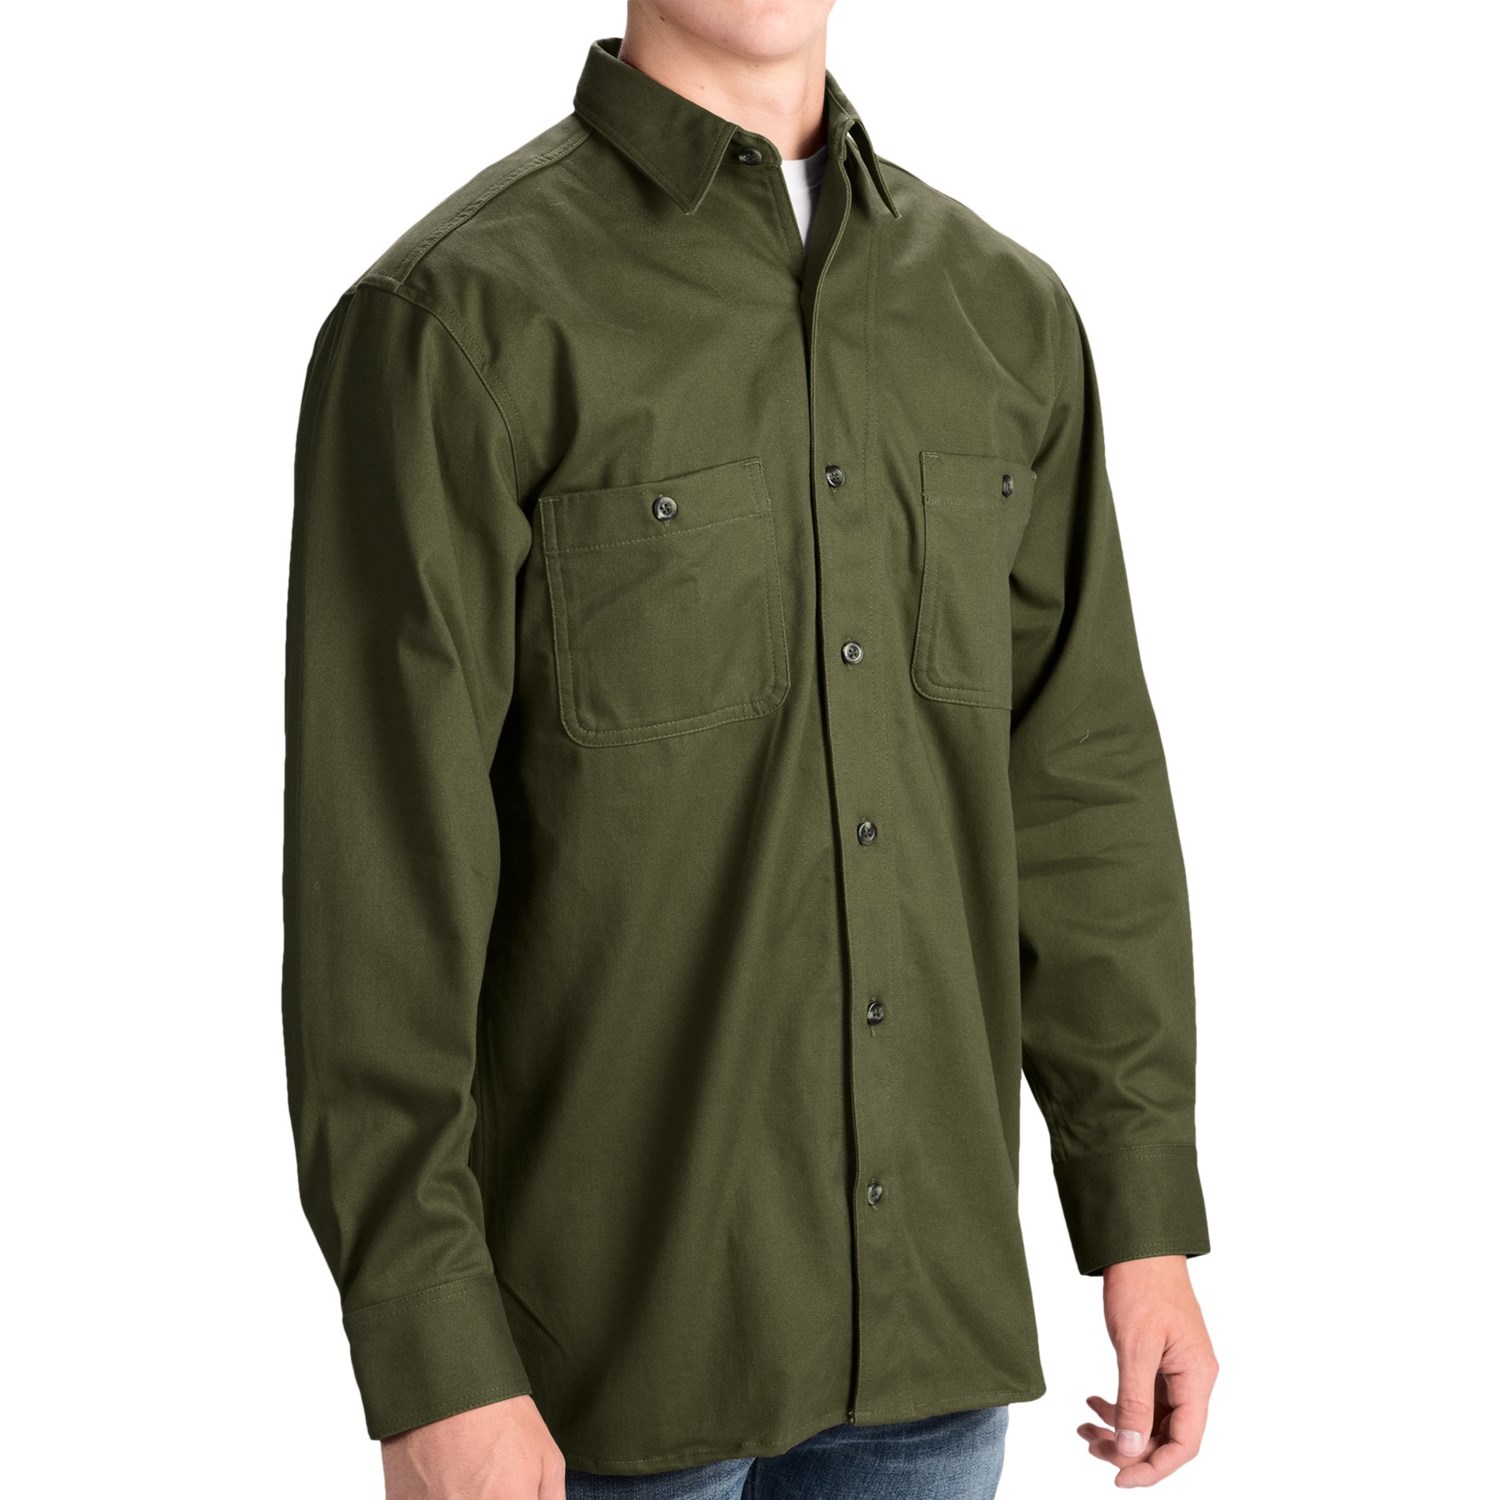 Stormy Kromer Solid Cotton Twill Shirt (For Men) - Save 71%